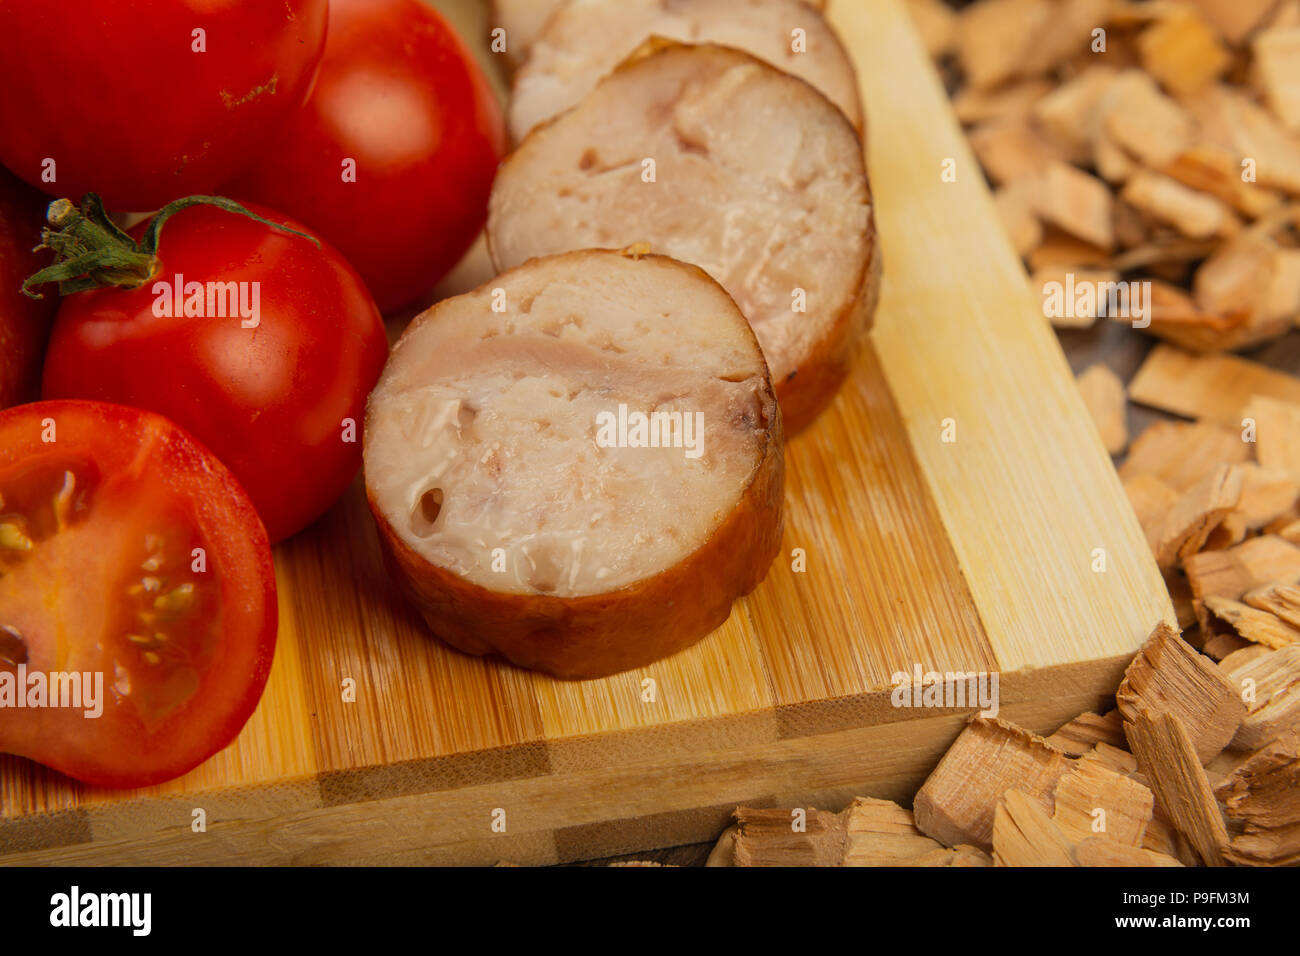 Homemade sausage on a wooden background with seasonings and sauce. Stock Photo